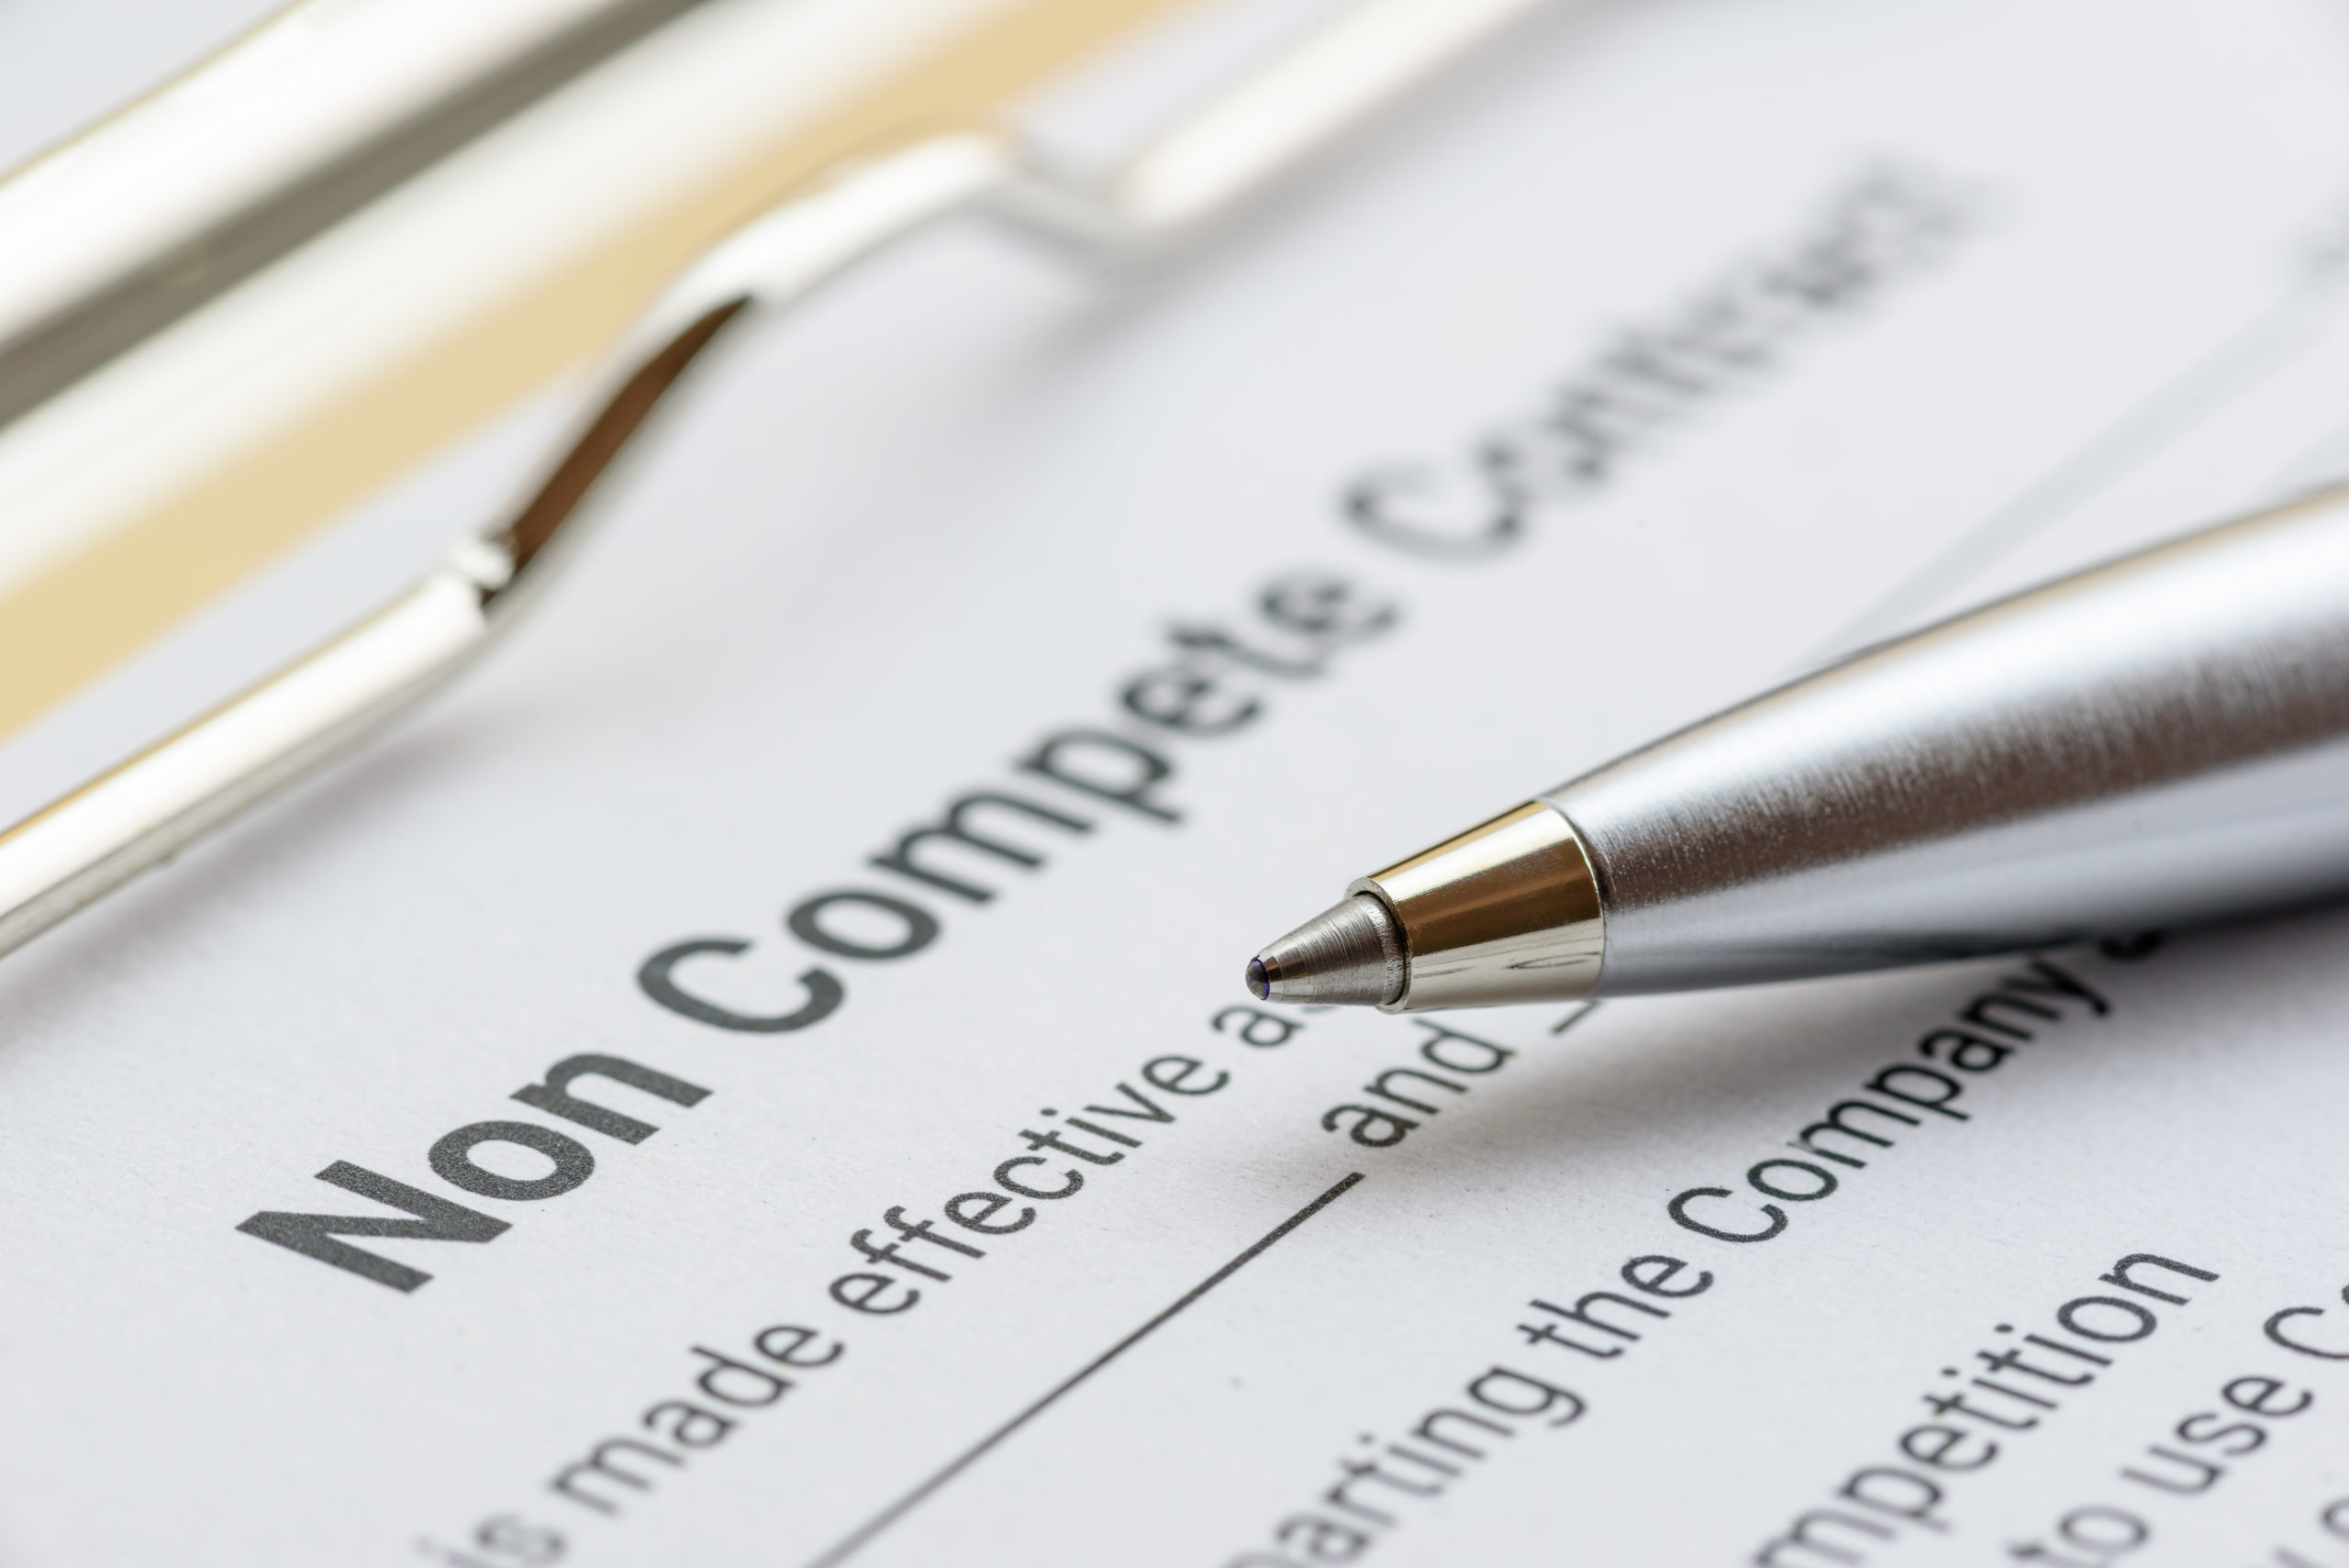 What Is The Penalty For A Breach Of A Non-Compete Covenant?